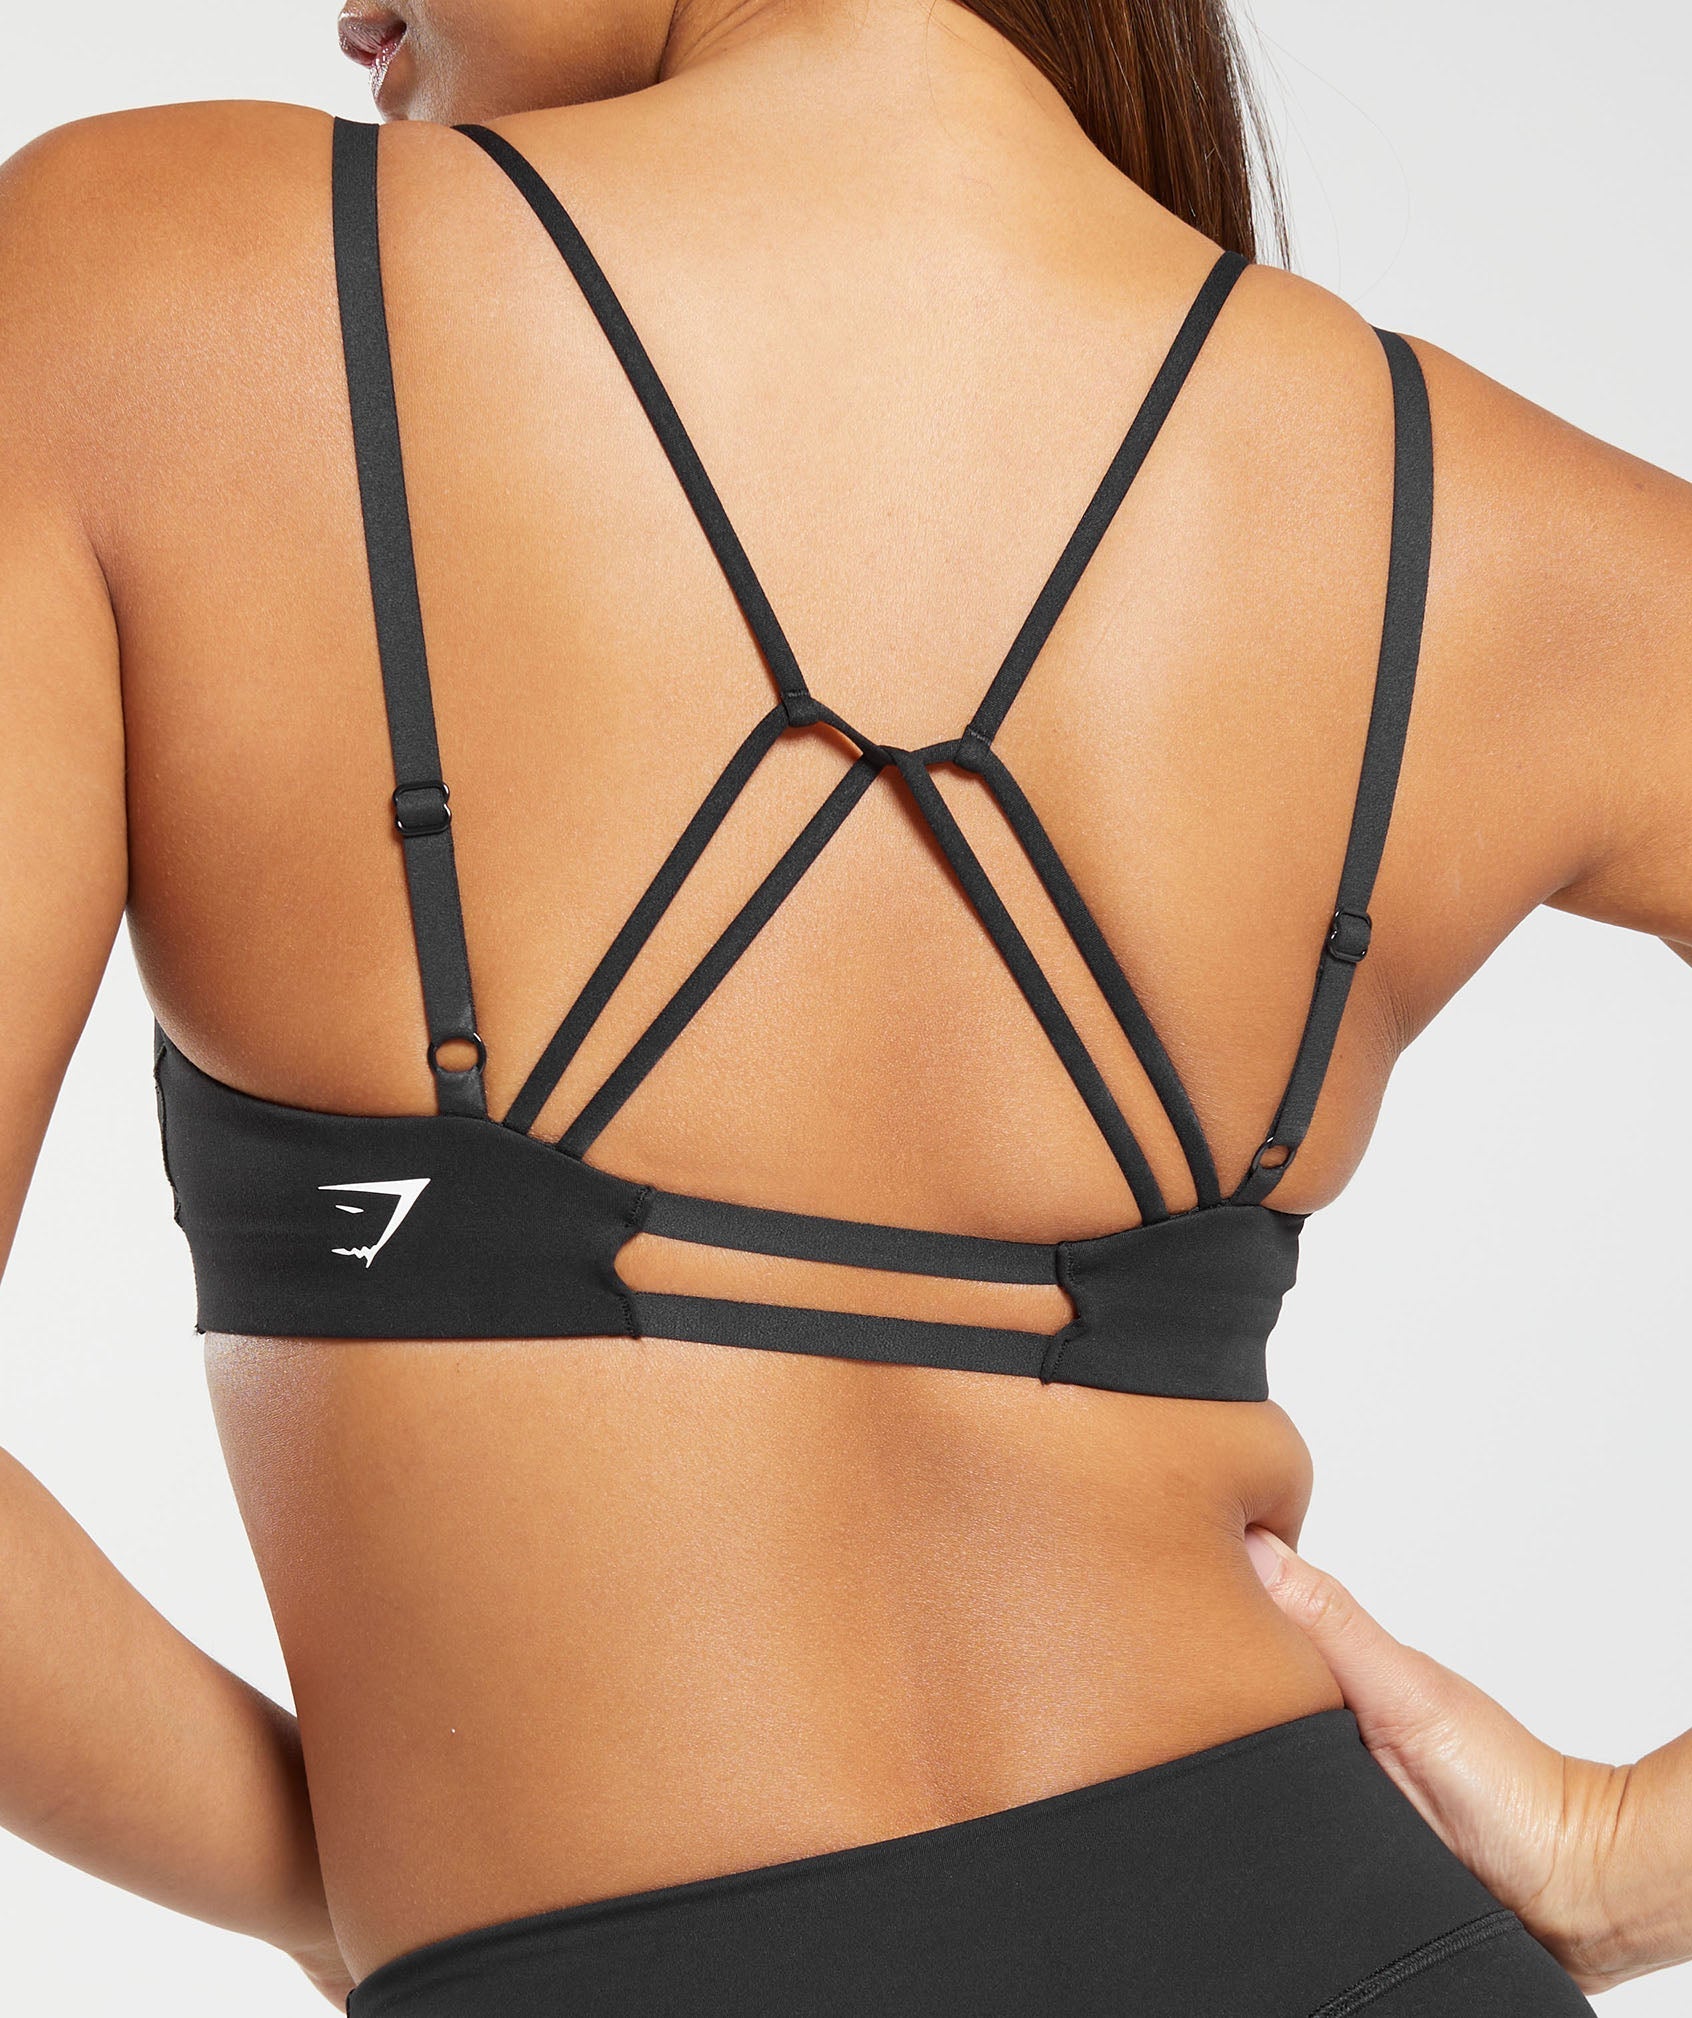 Strappy Back Light Support Sports Bra in Black - view 7